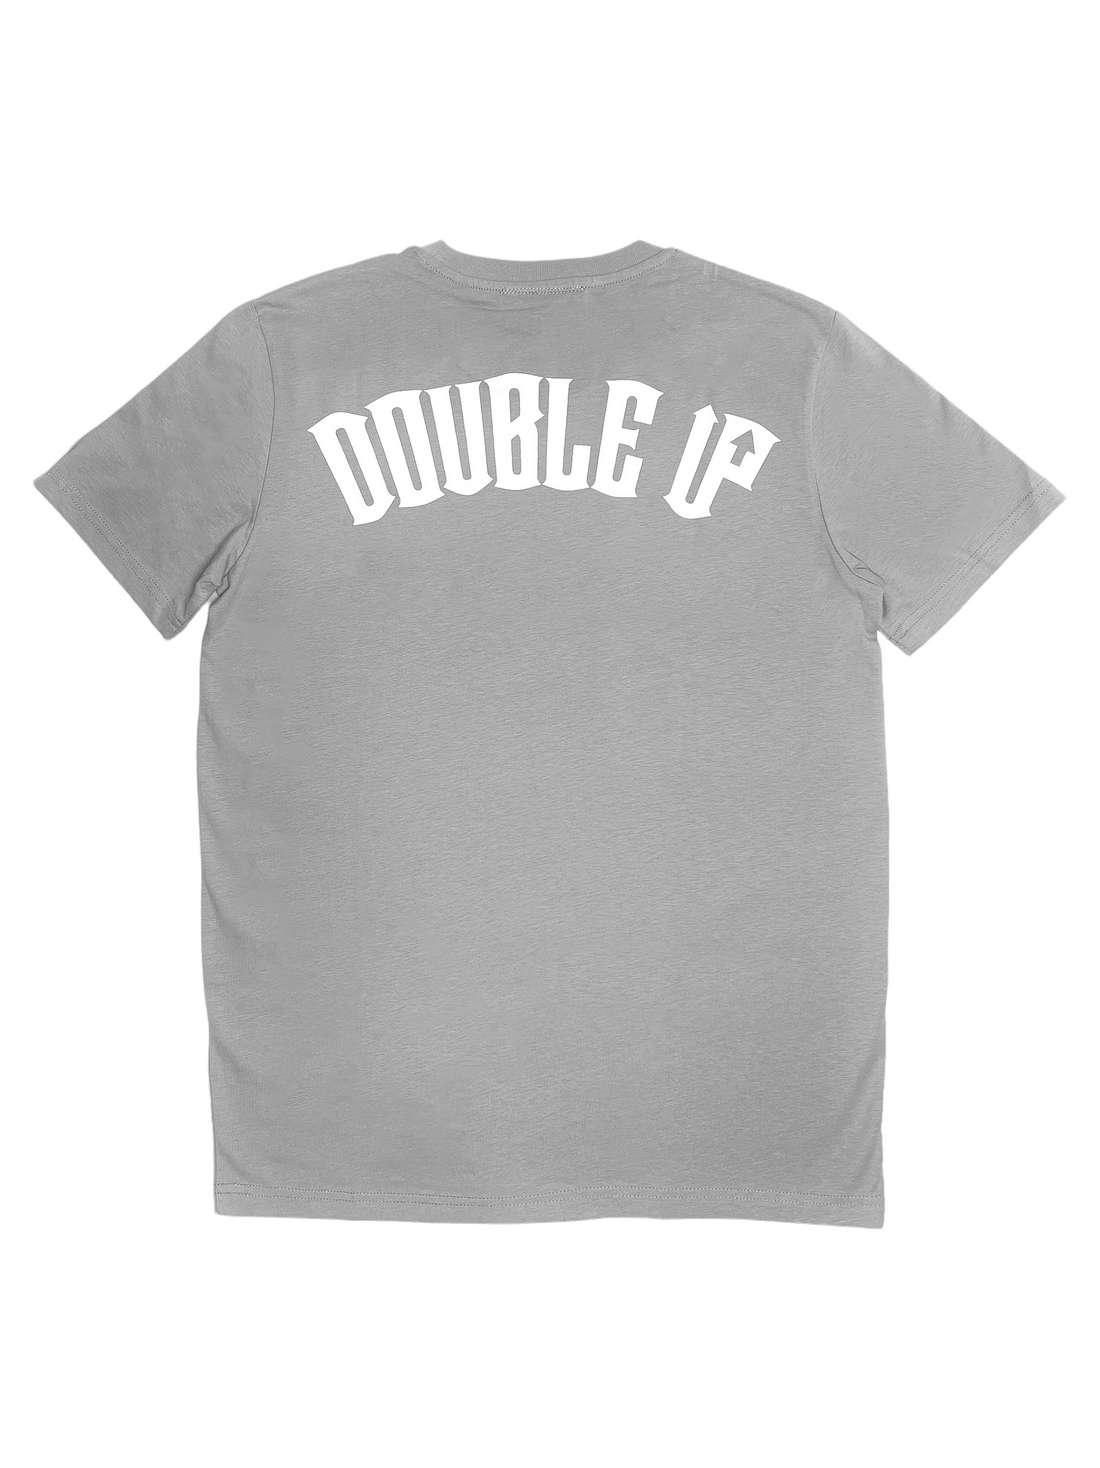 Double Up Arched T-Shirt - Grey/White